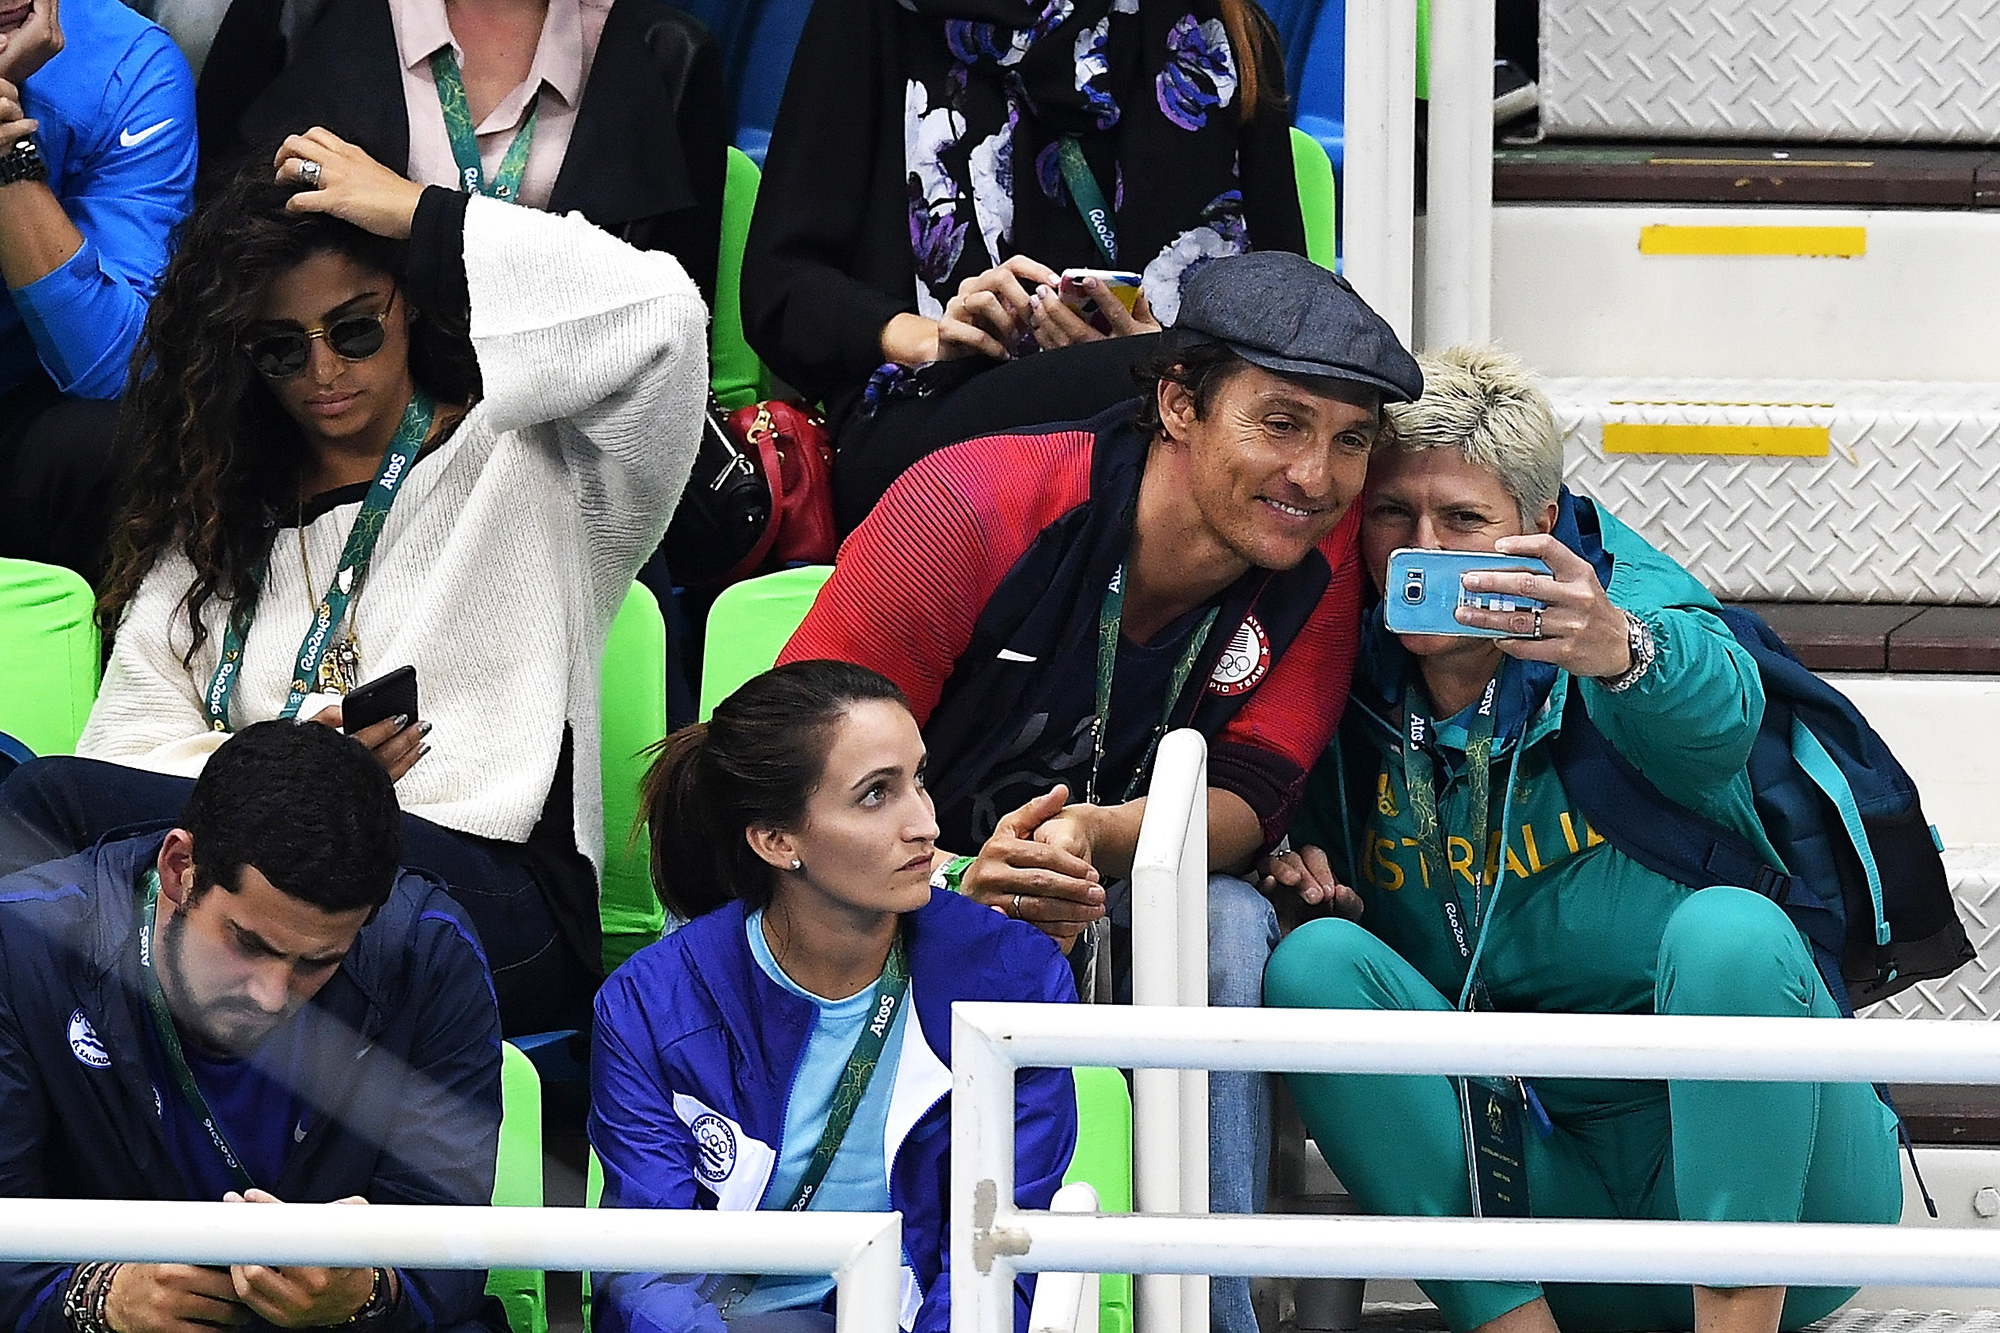 Matthew McConaughey takes a selfie with a guest during the swimming semifinals and finals on Day 5 of the Rio 2016 Olympic Games, on Aug. 9, 2016 in Rio de Janeiro, Brazil.